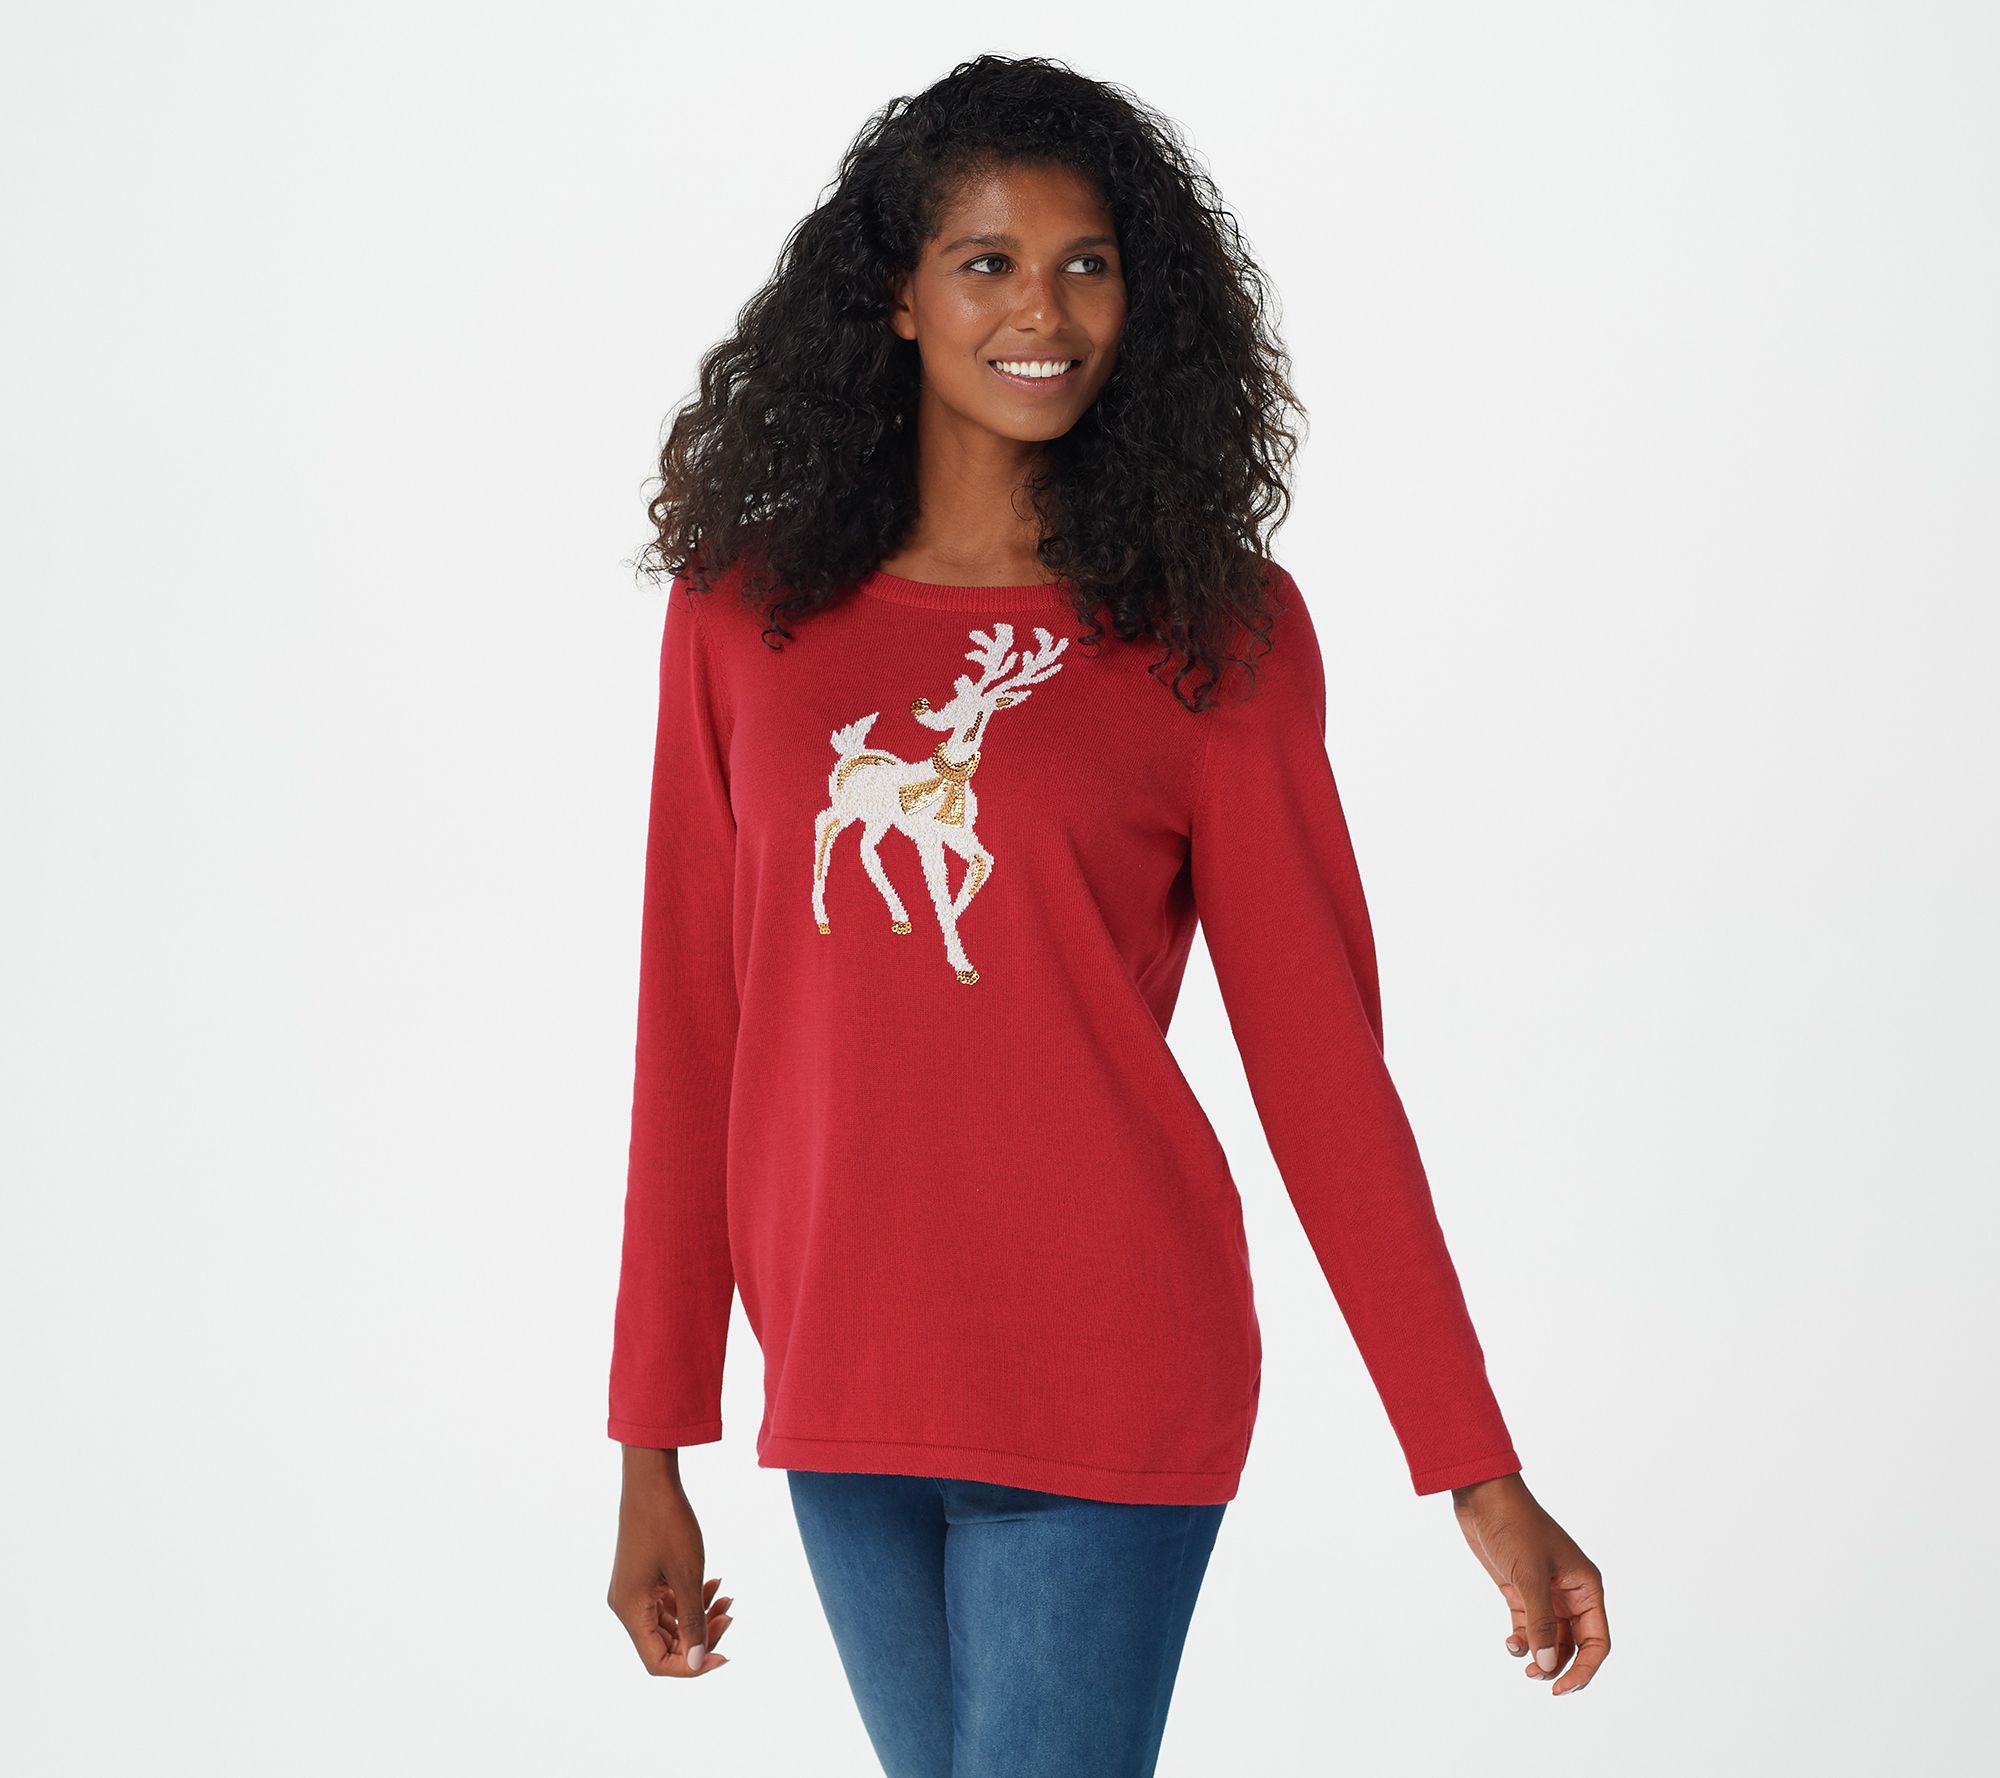 Coolred-Women Long Sleeve Casual Floral Christmas Pullovers Sweatshirt 